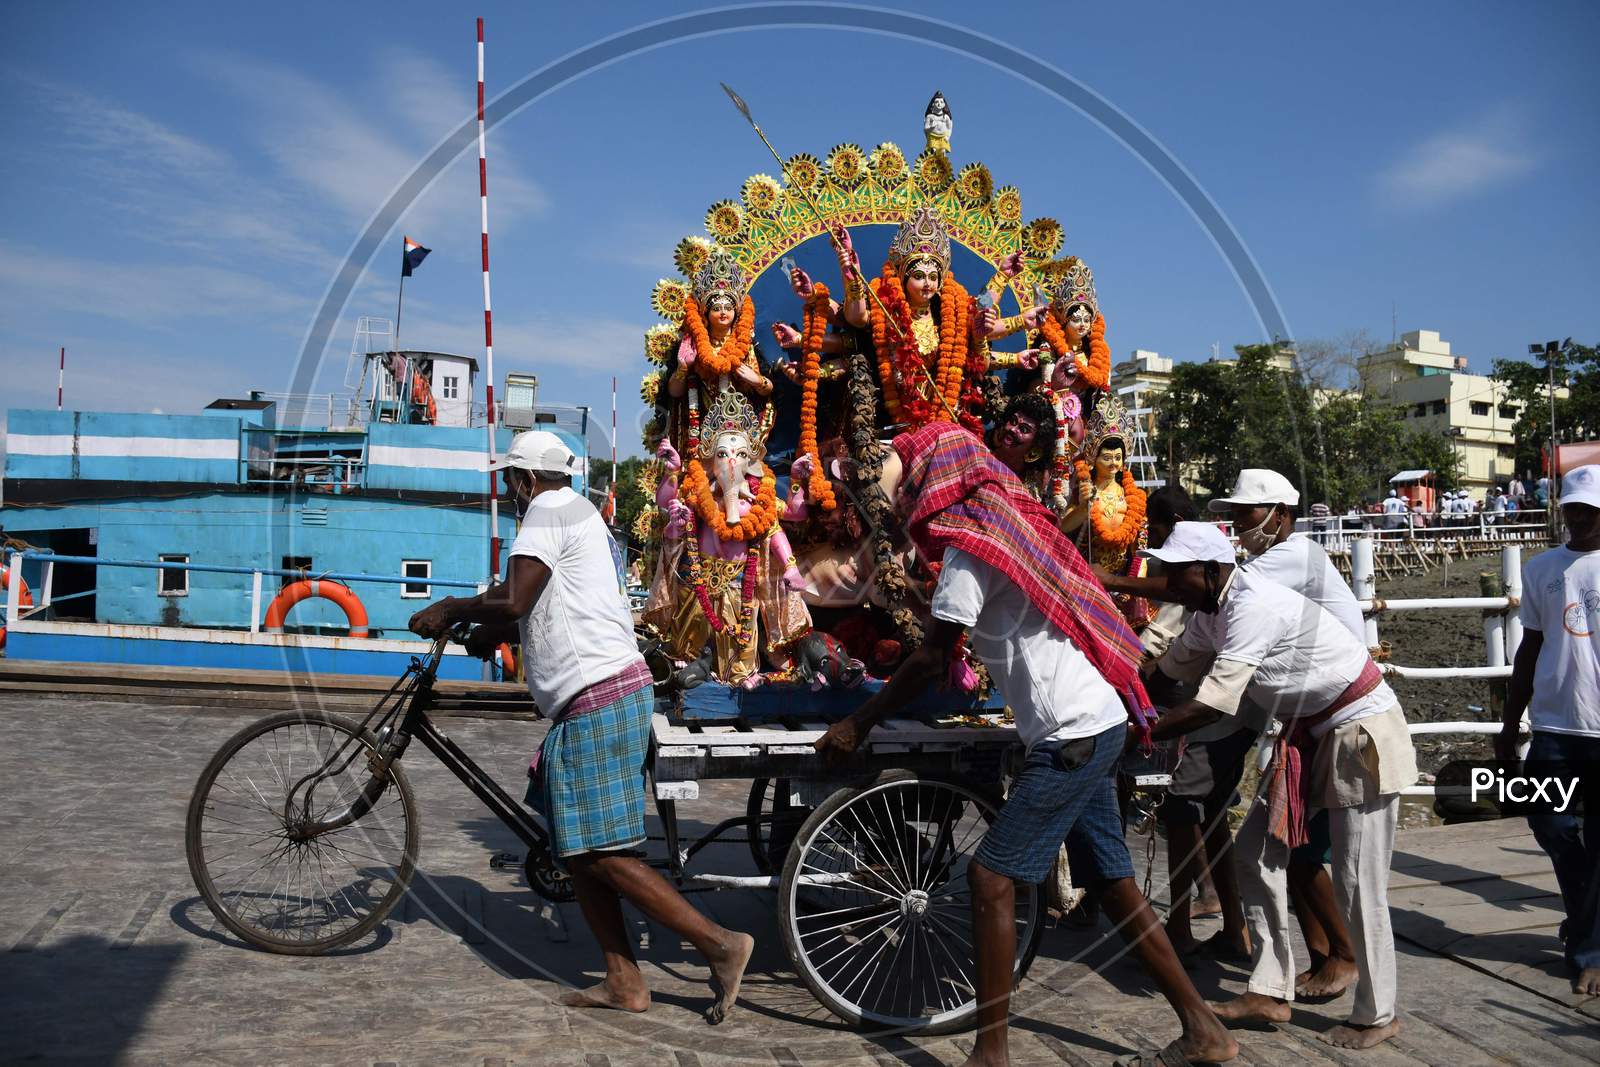 Municipal workers carry an idol of the Hindu goddess Durga for immersion in the waters of the river Brahmaputra on the last day of the Durga Puja festival in Guwahati on oct 26,2020.